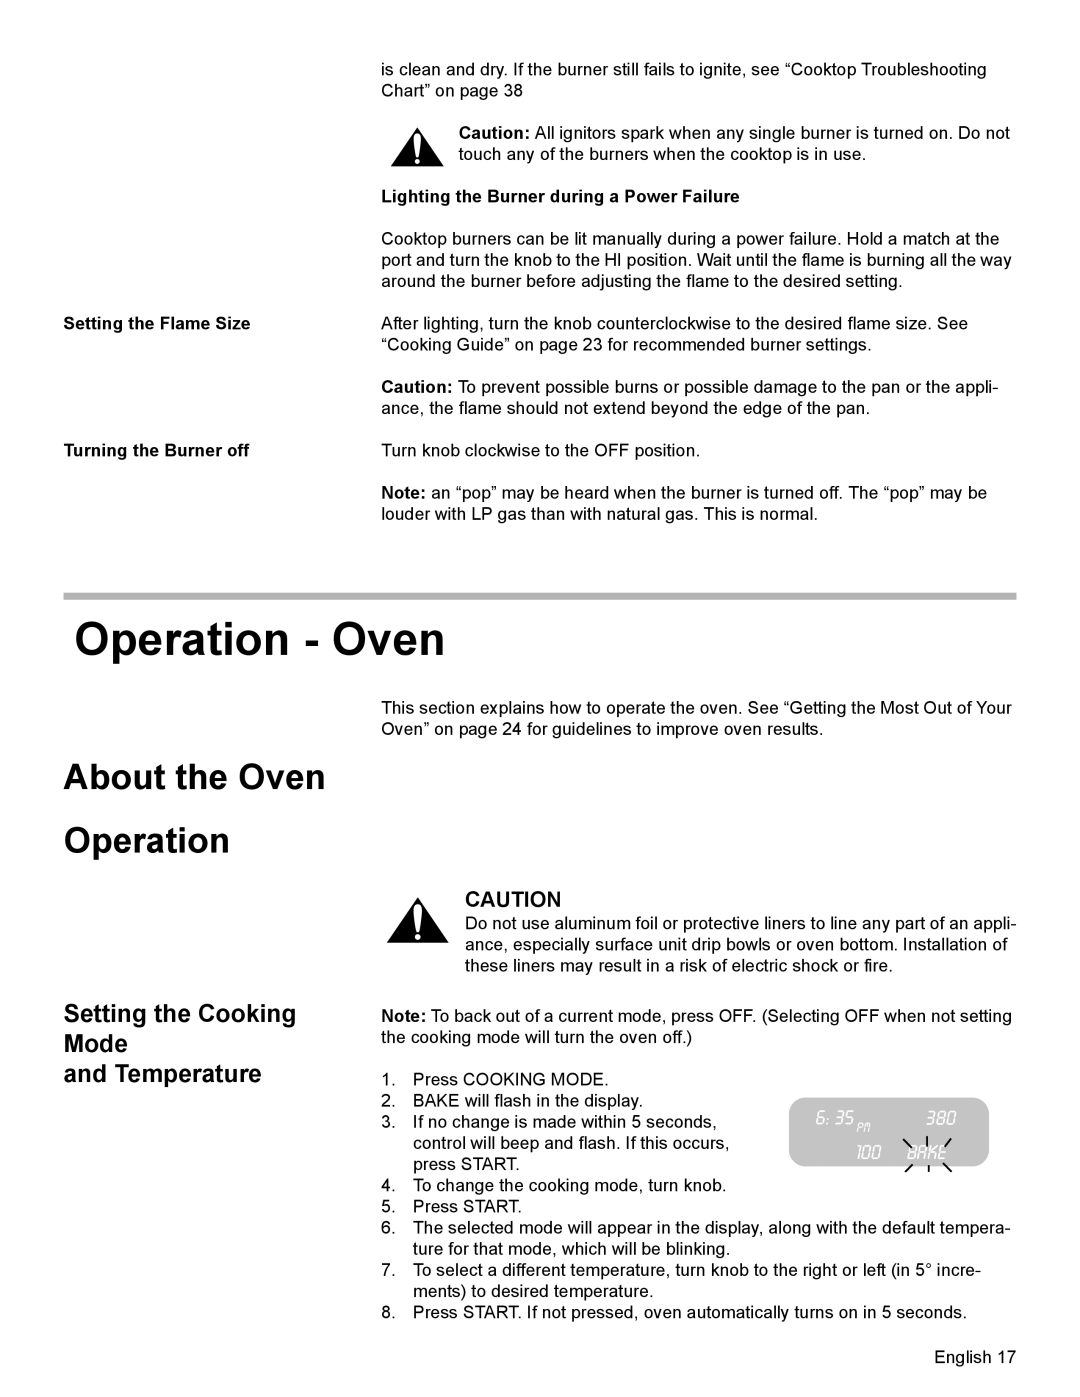 Bosch Appliances HGS7052UC Operation - Oven, About the Oven Operation, Setting the Cooking Mode and Temperature, 6 35 PM 